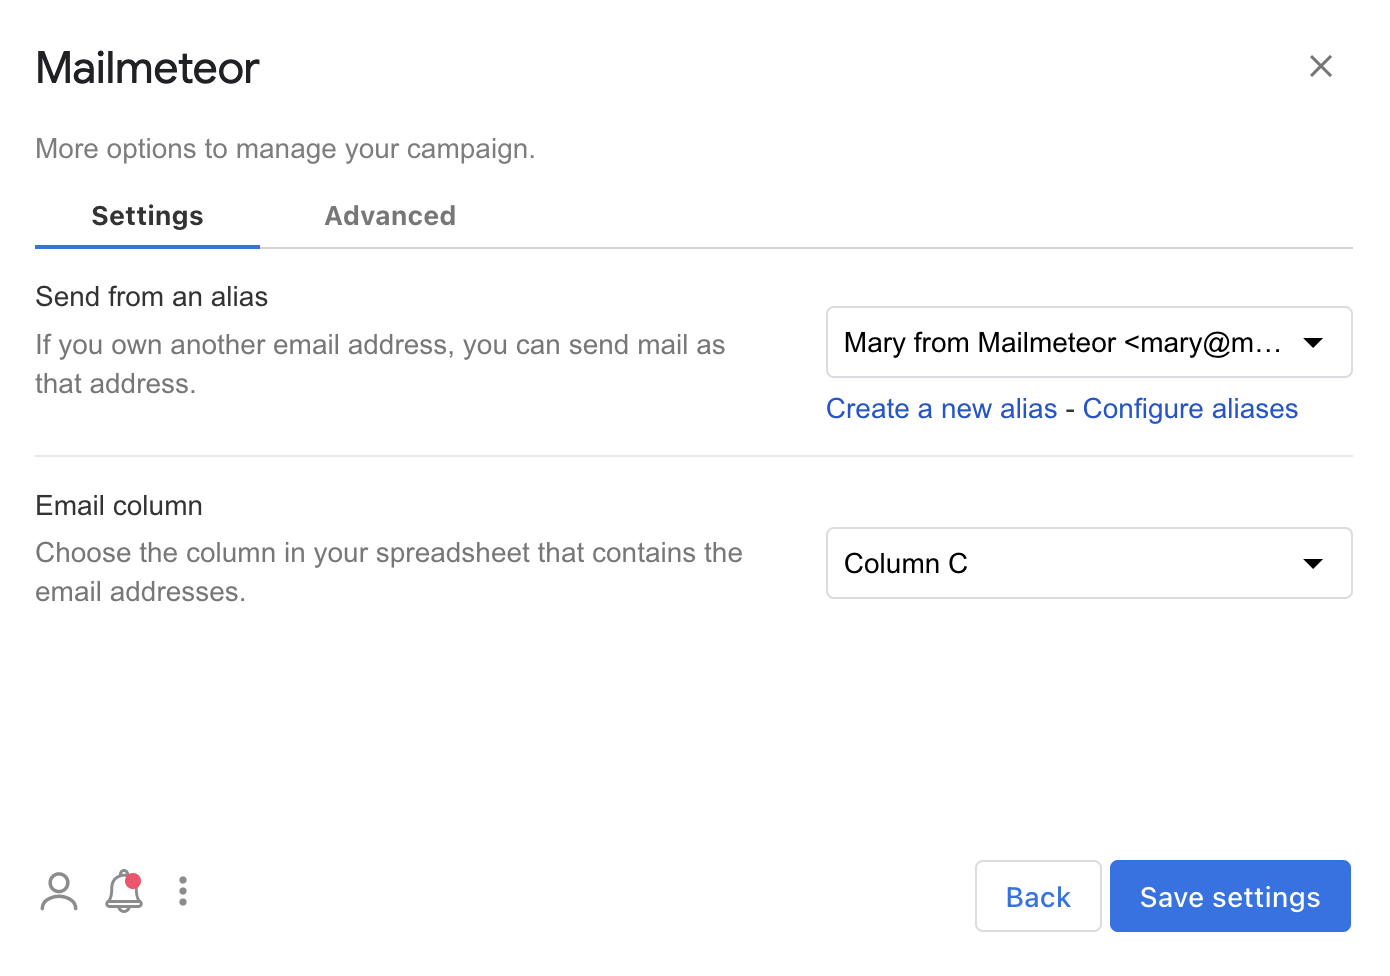 Select the email column when performing a mail merge in Google Sheets